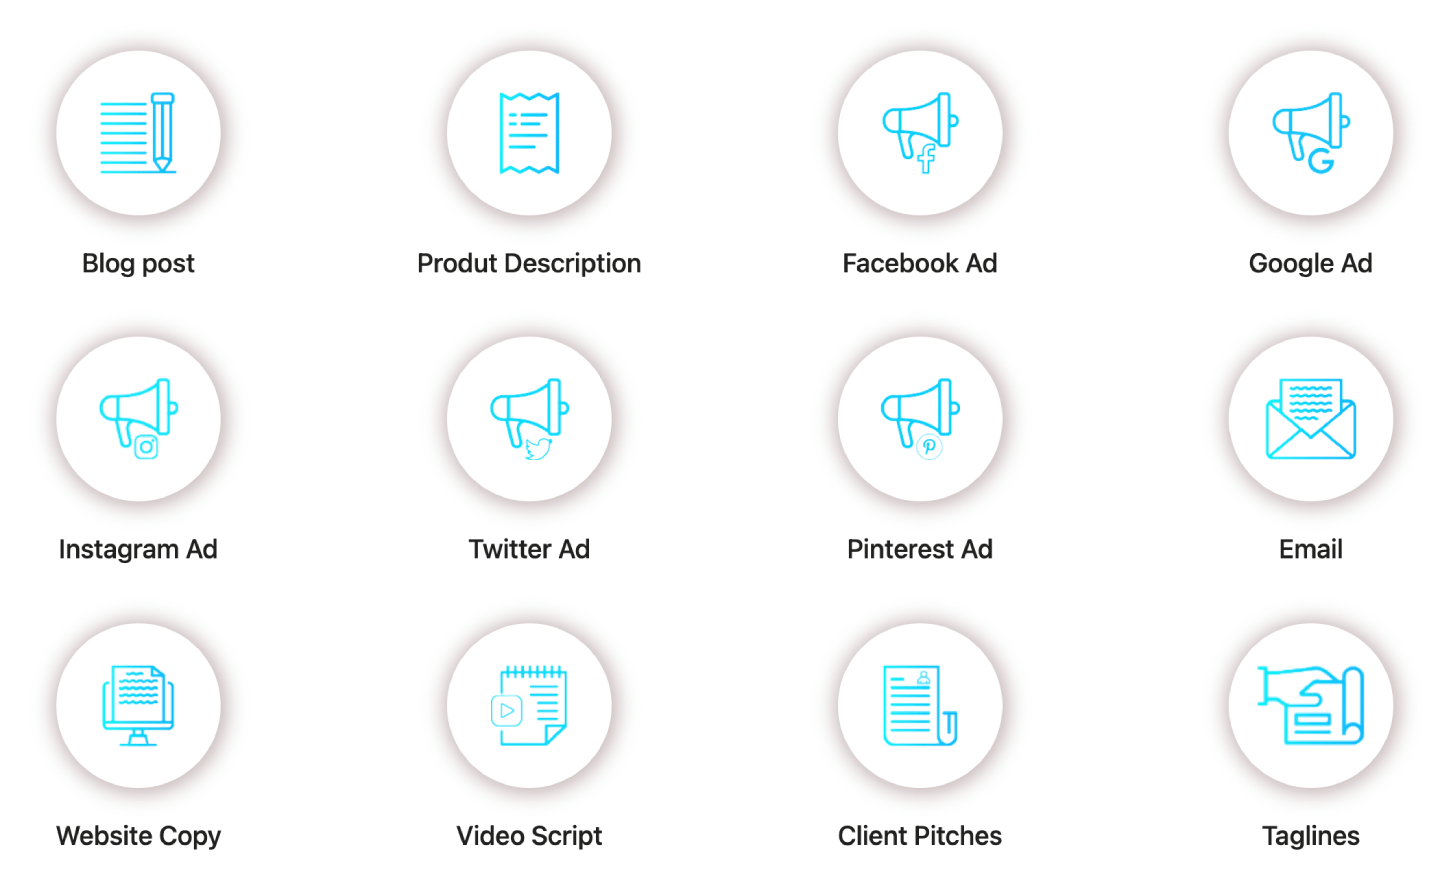 ContentBox's Features